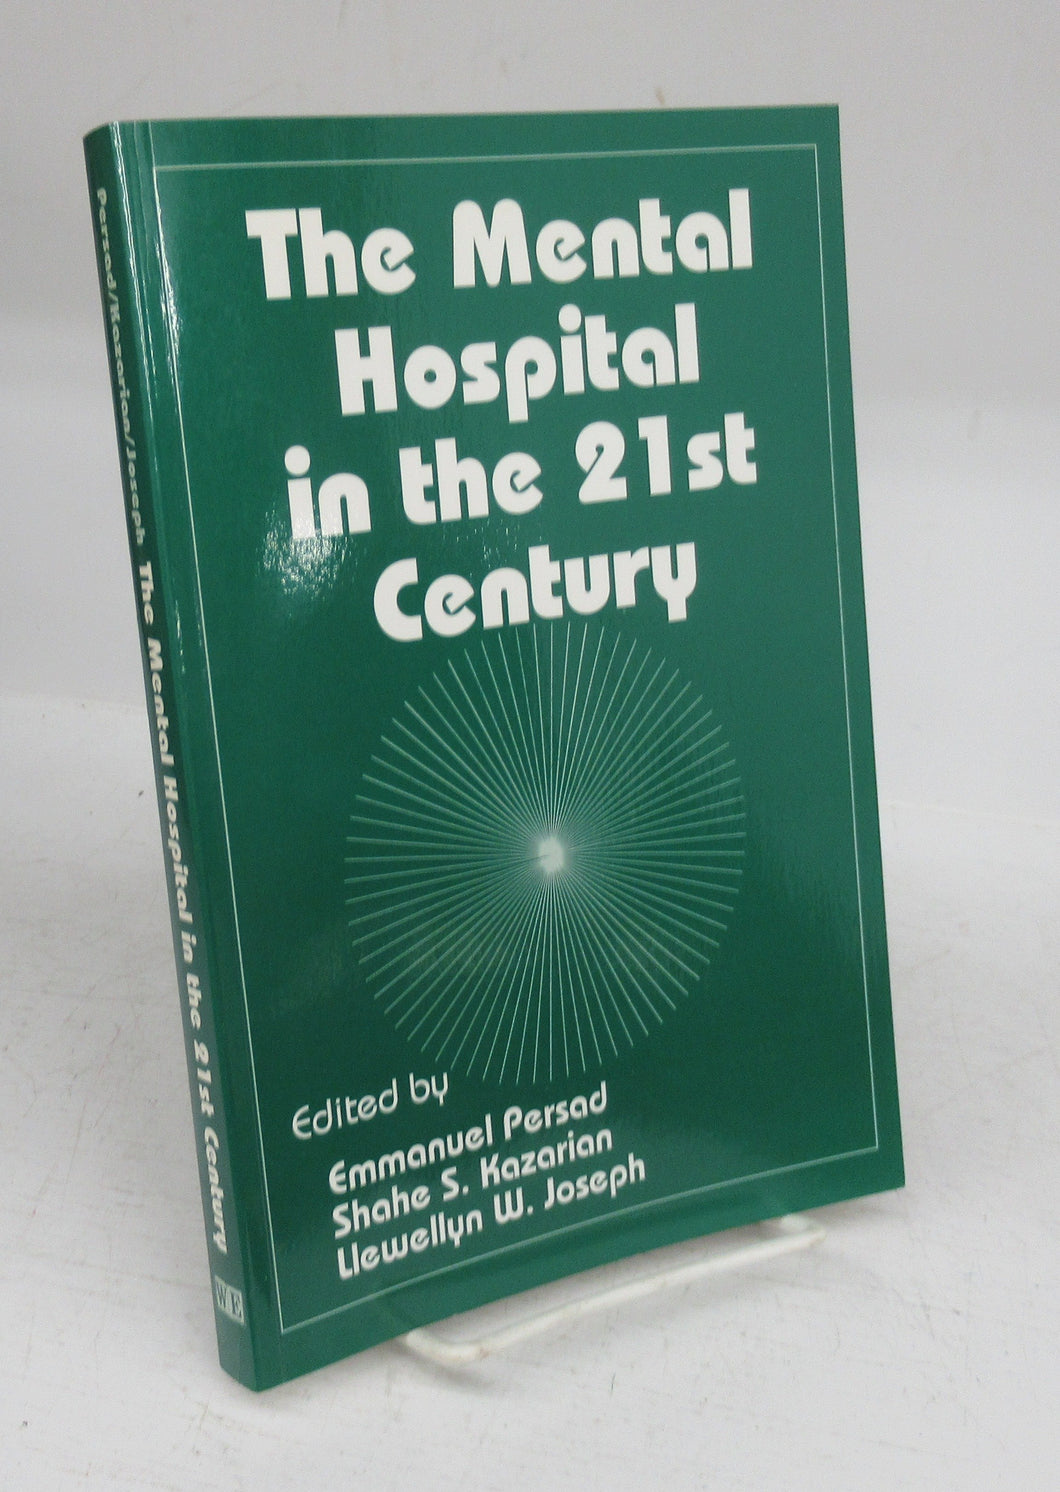 The Mental Hospital in the 21st Century